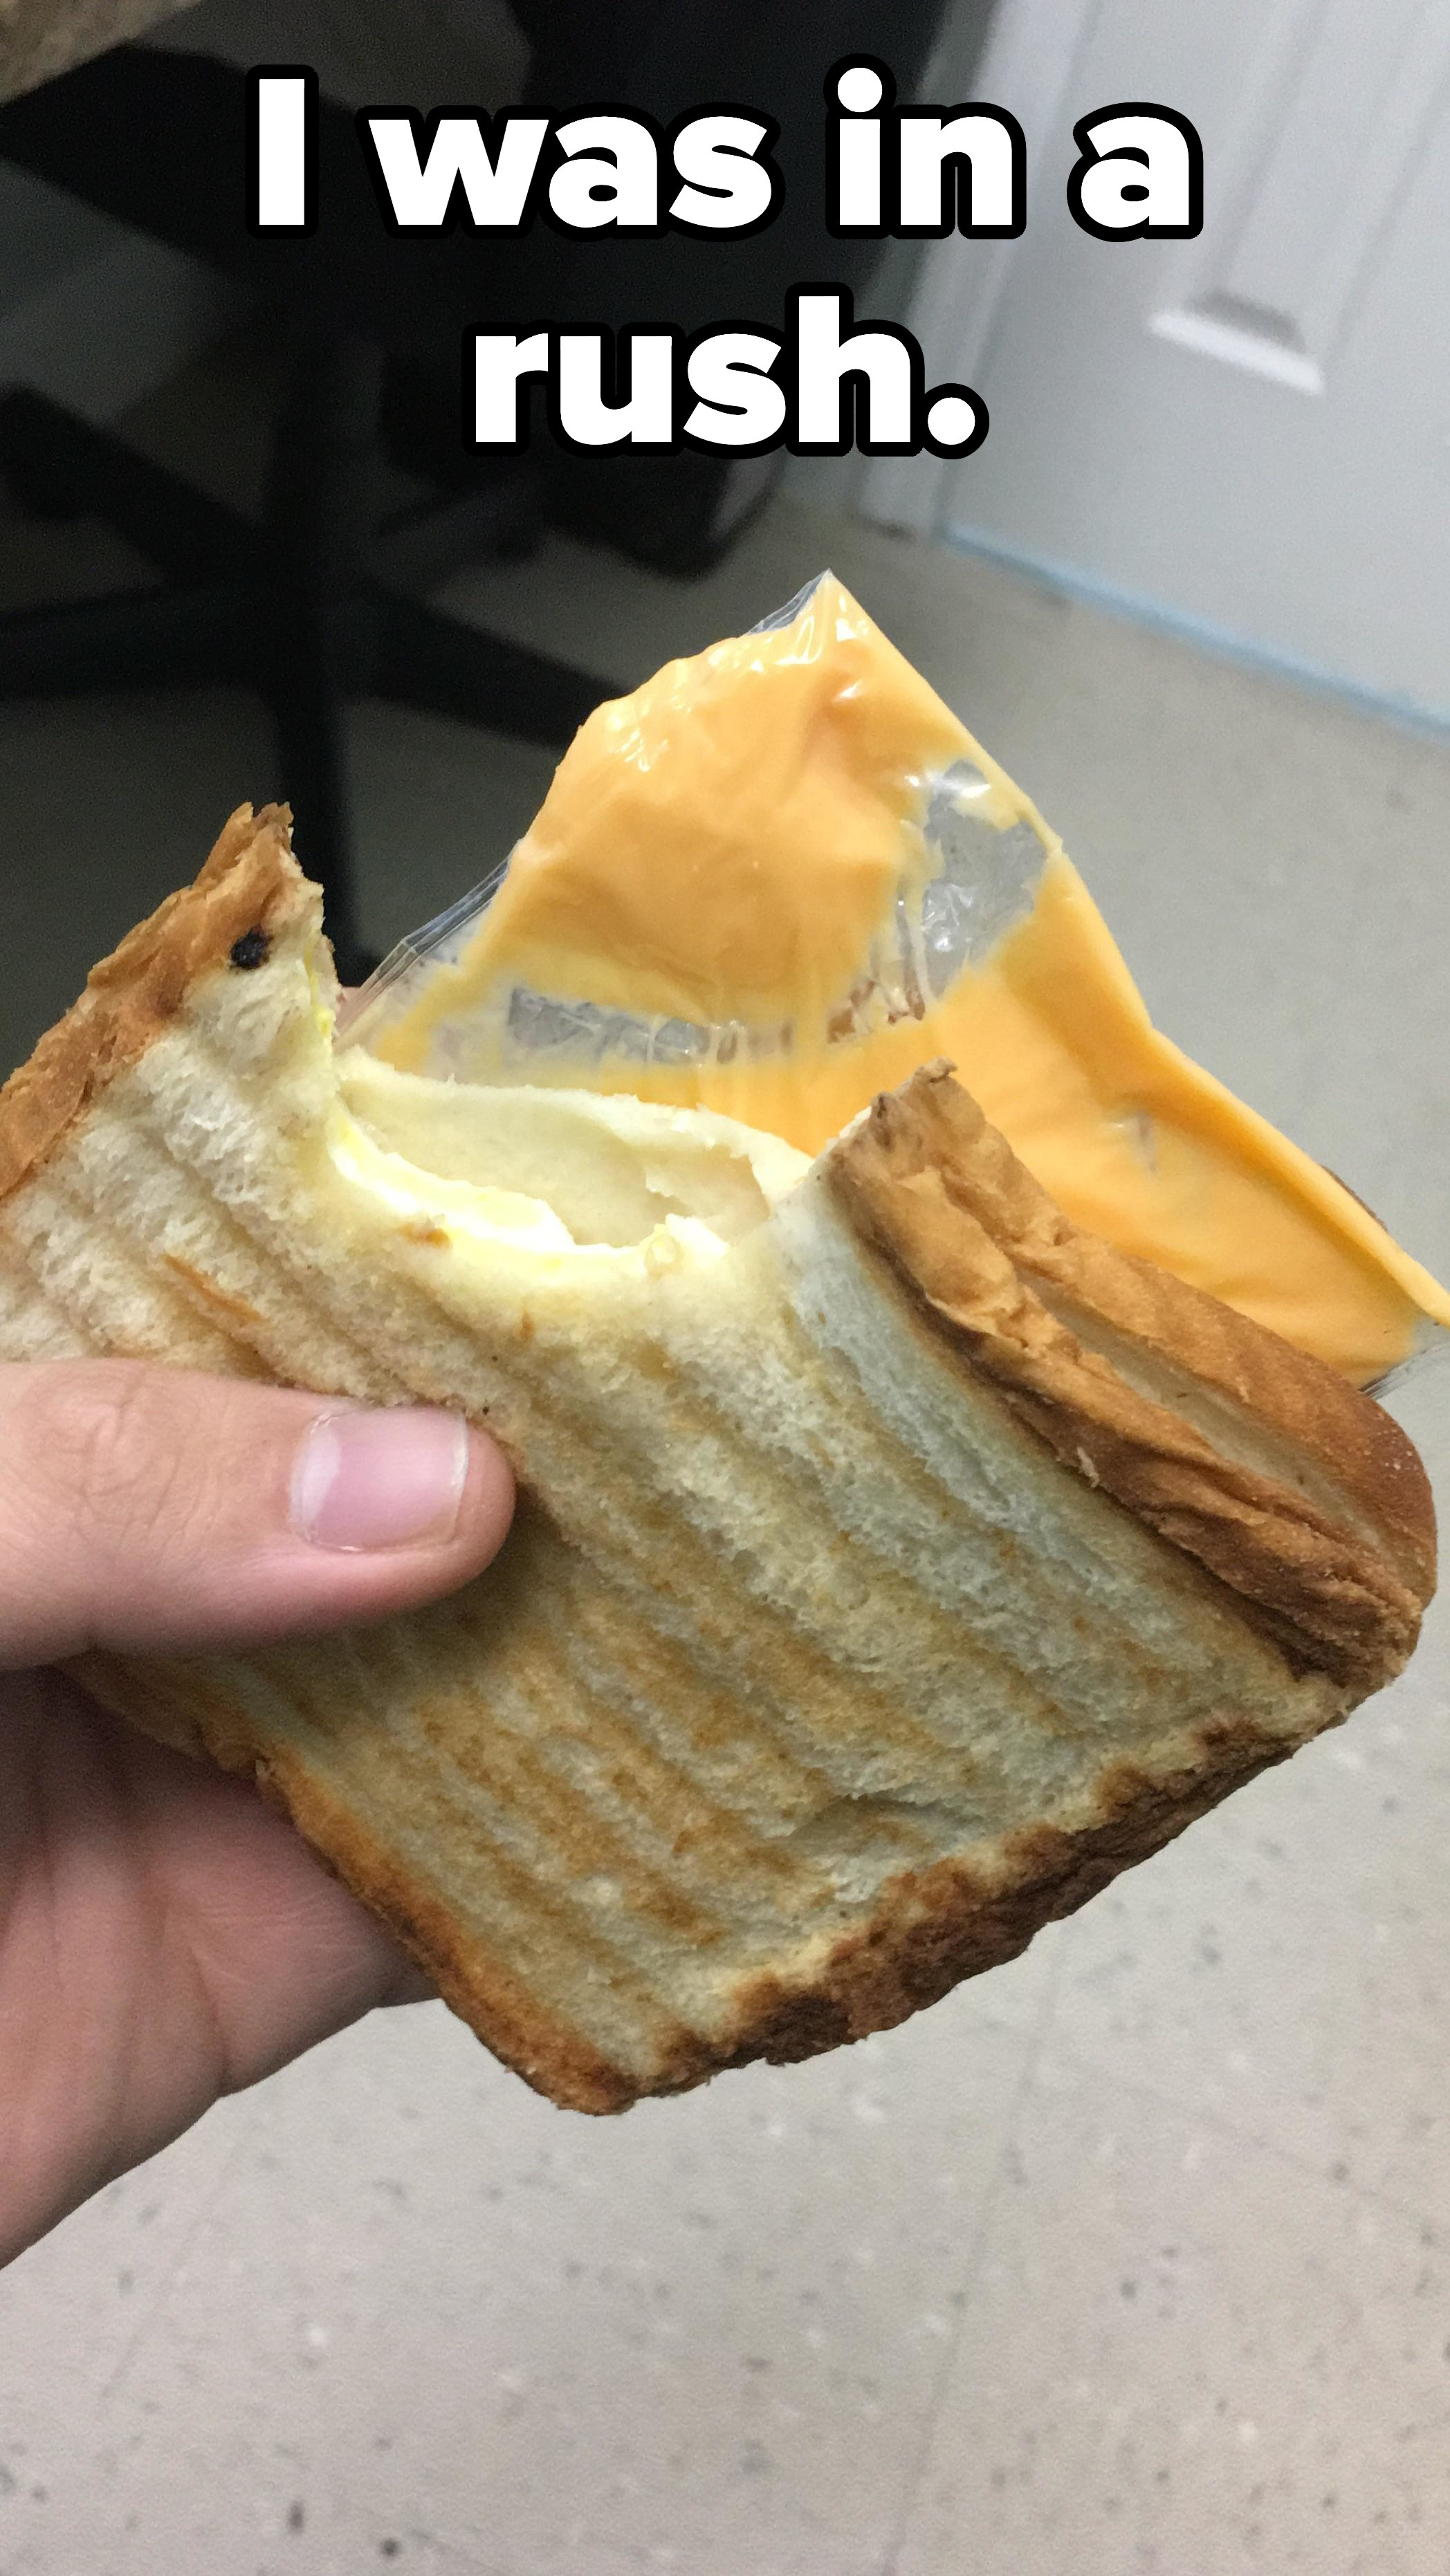 a sandwich that has a bite taken out of it with the cheese stilled wrapped up